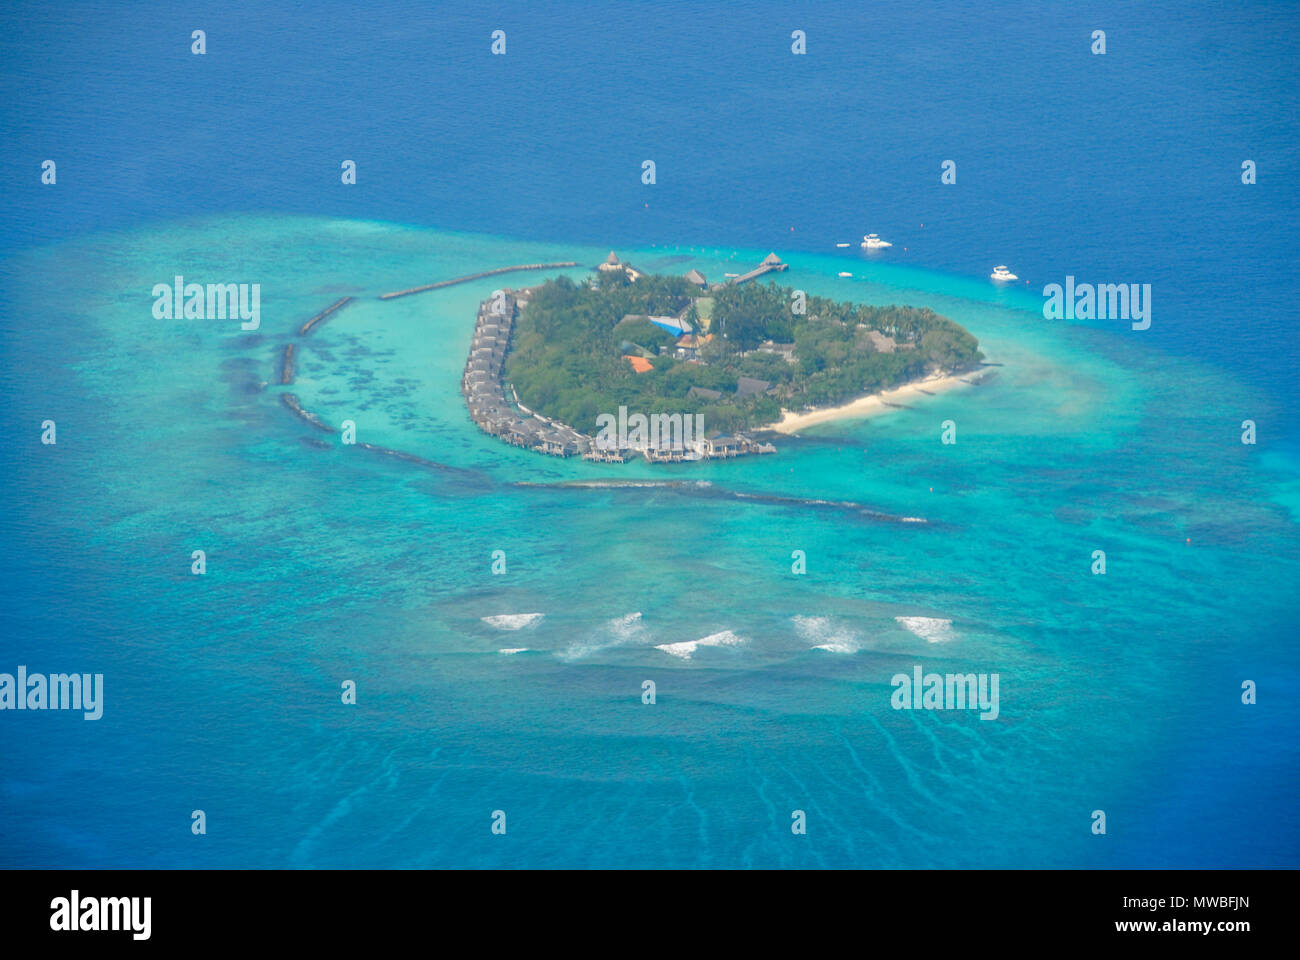 View of Maldives seaplaned of the Maldivian Air Taxi airline from Male, Aerial airborne view of islands and atolls within the Maldives, Indian Ocean.  Stock Photo